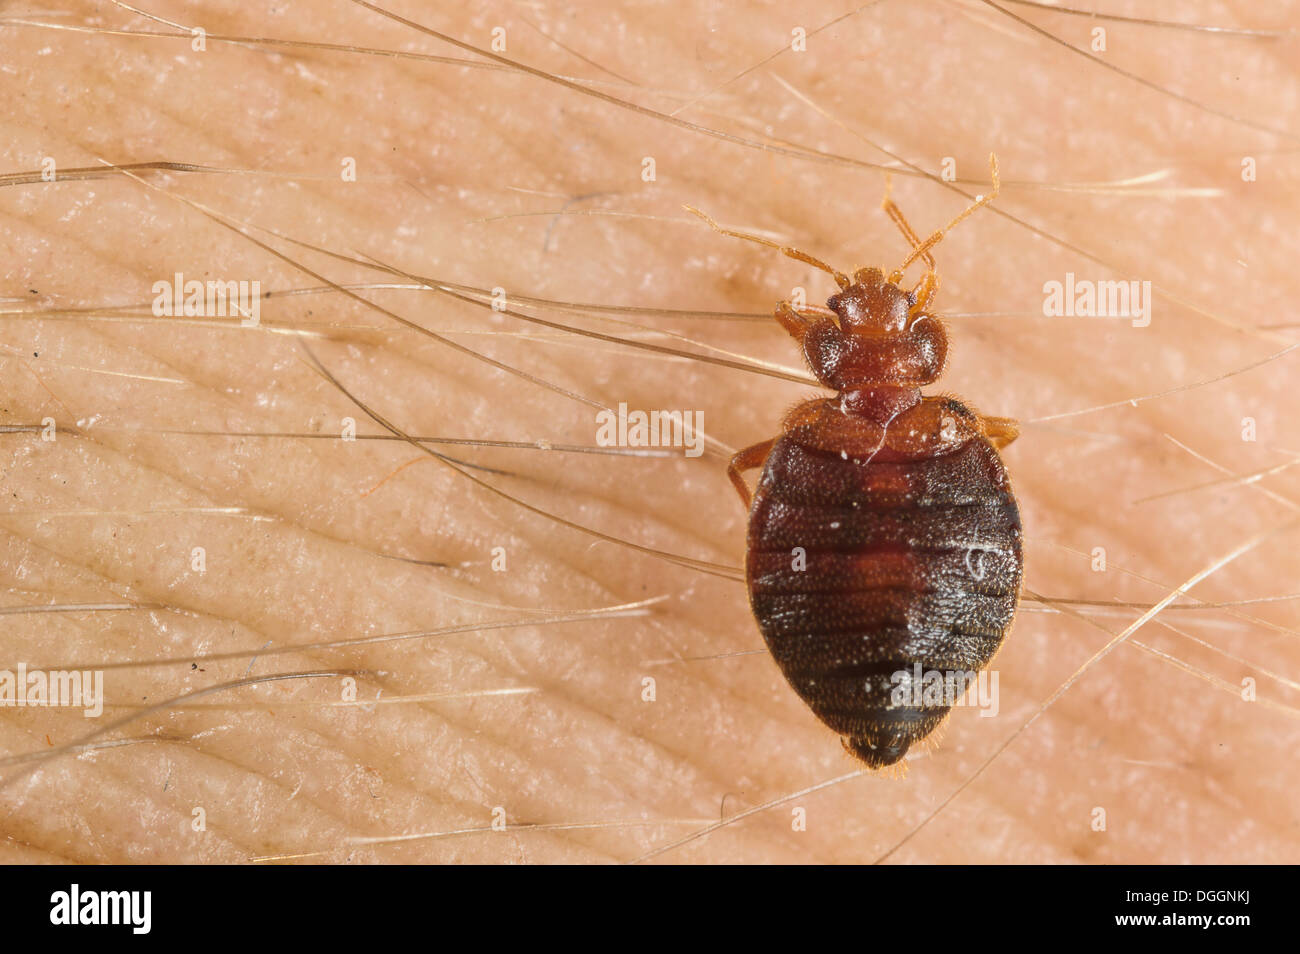 Common Bedbug (Cimex lectularius) adult, sucking blood from human skin, Italy, July Stock Photo